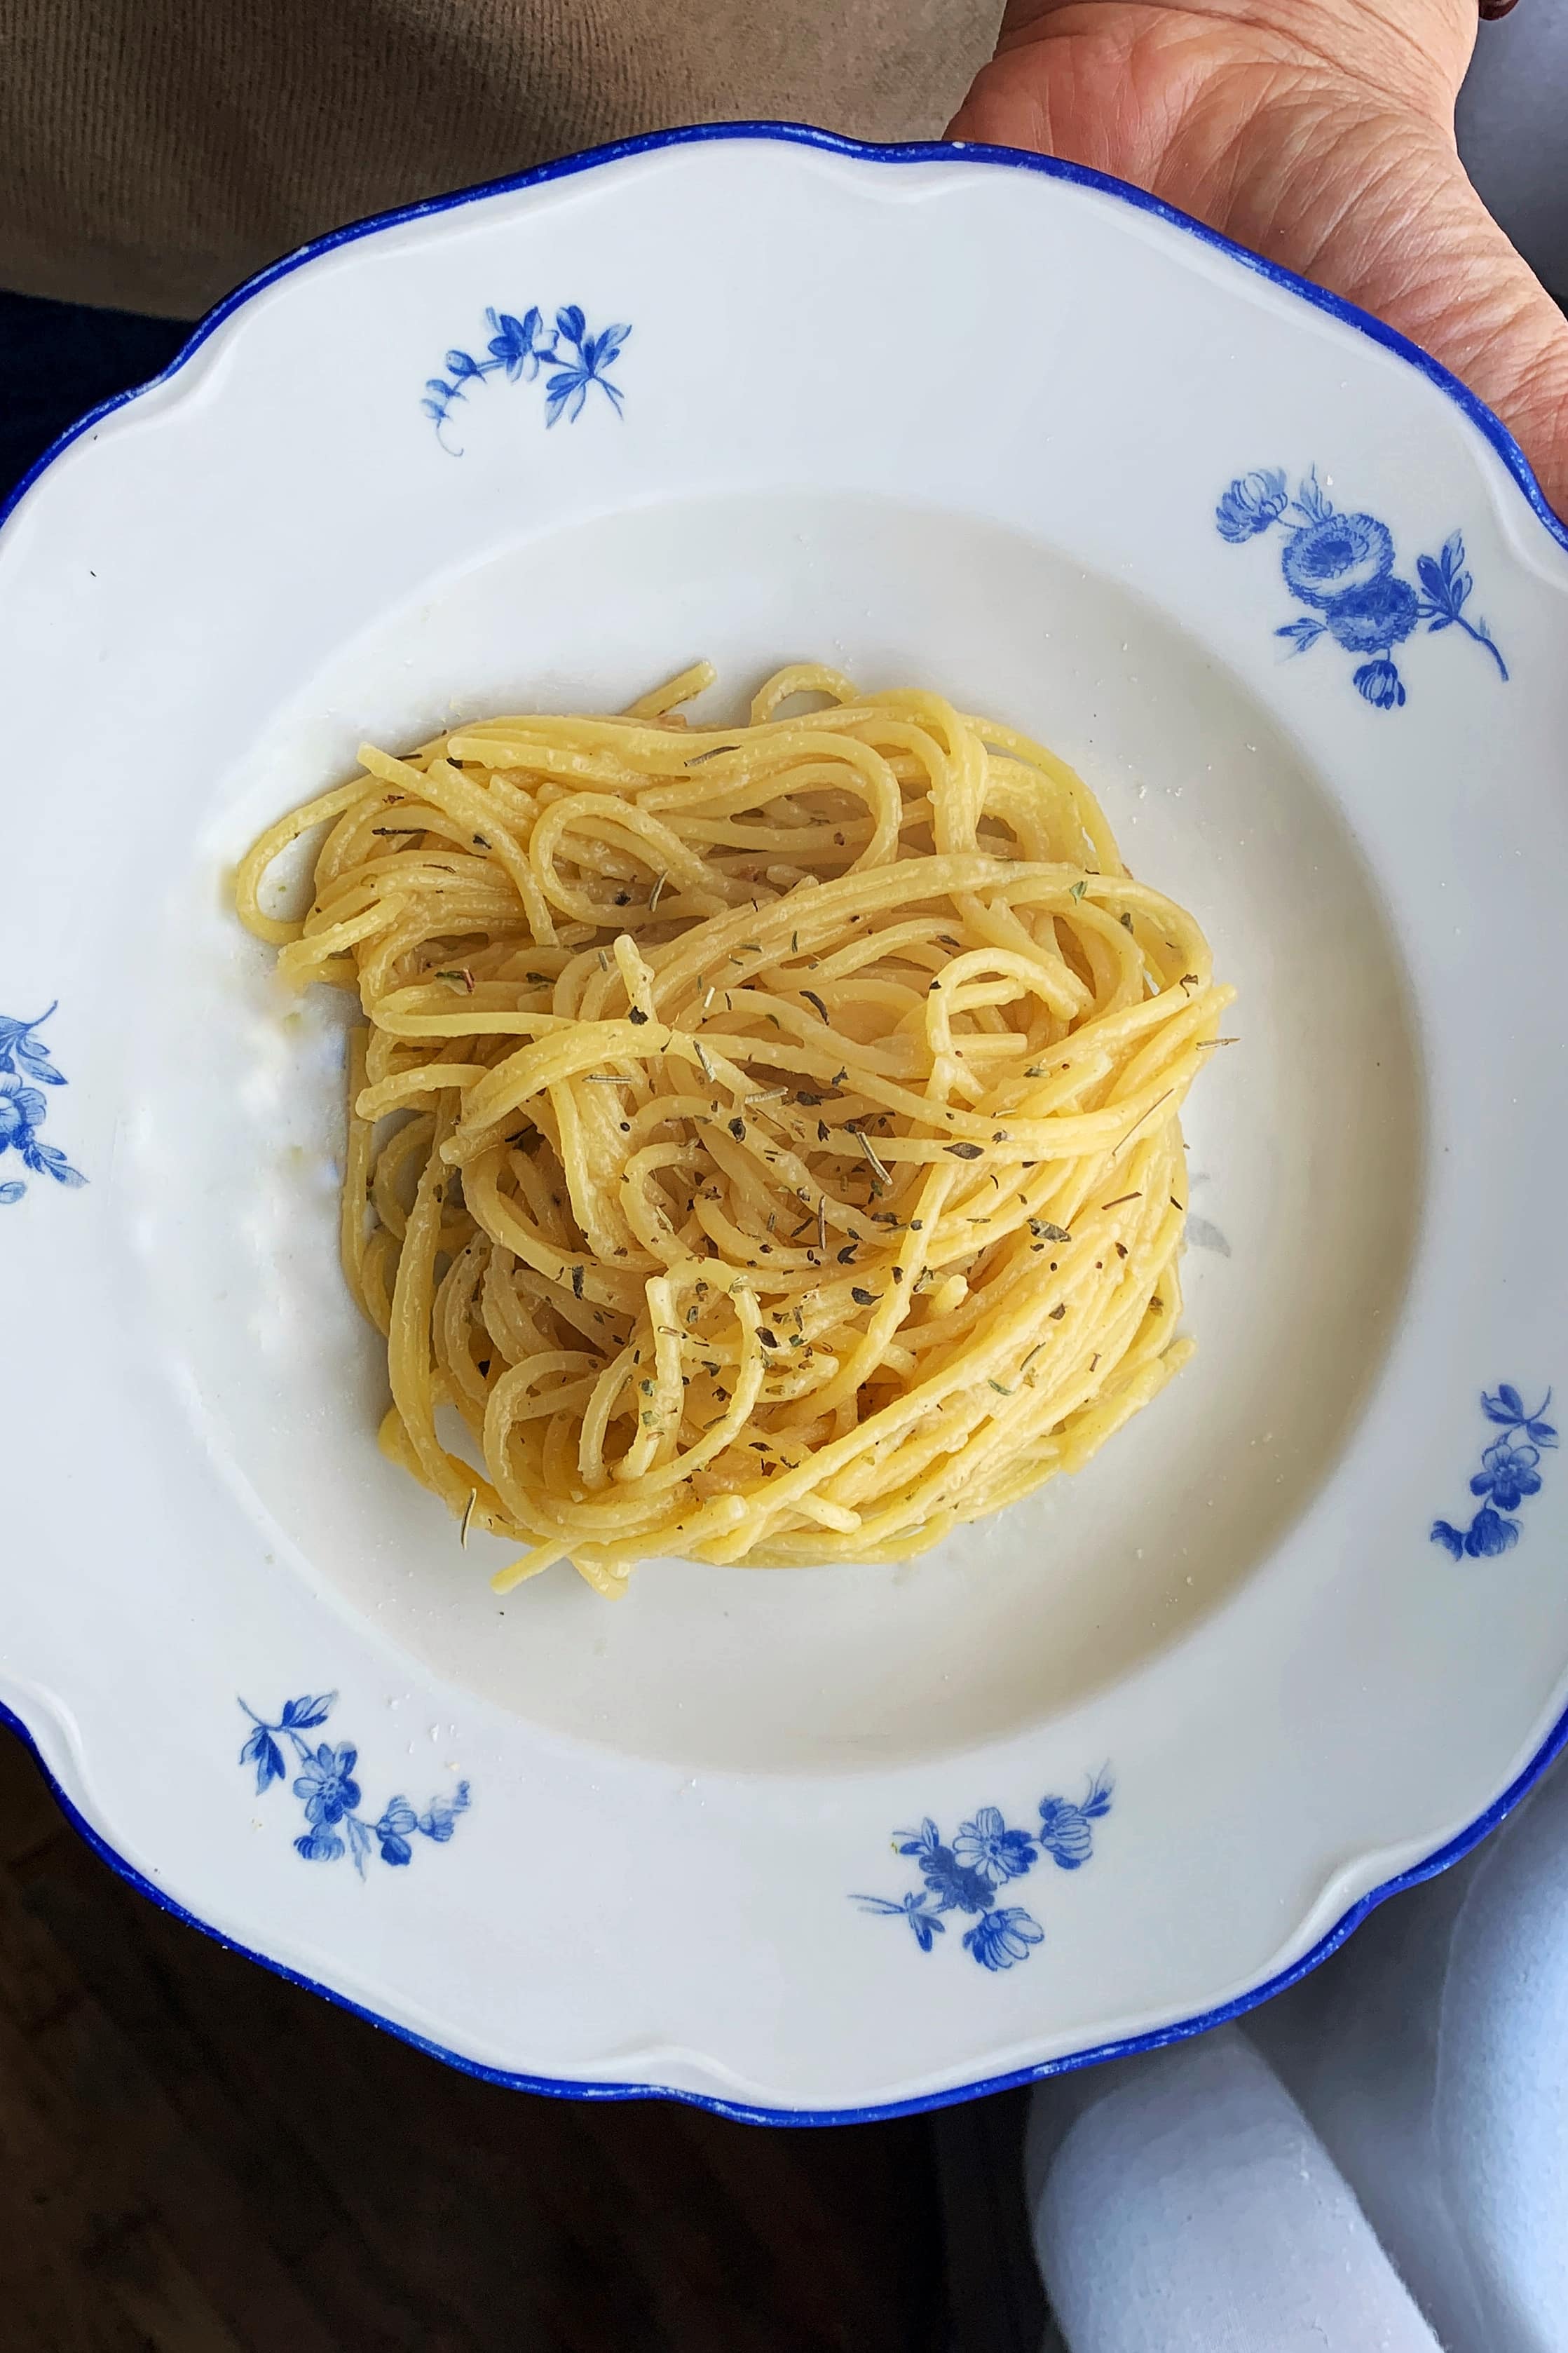 Ligurian pasta with salted anchvies